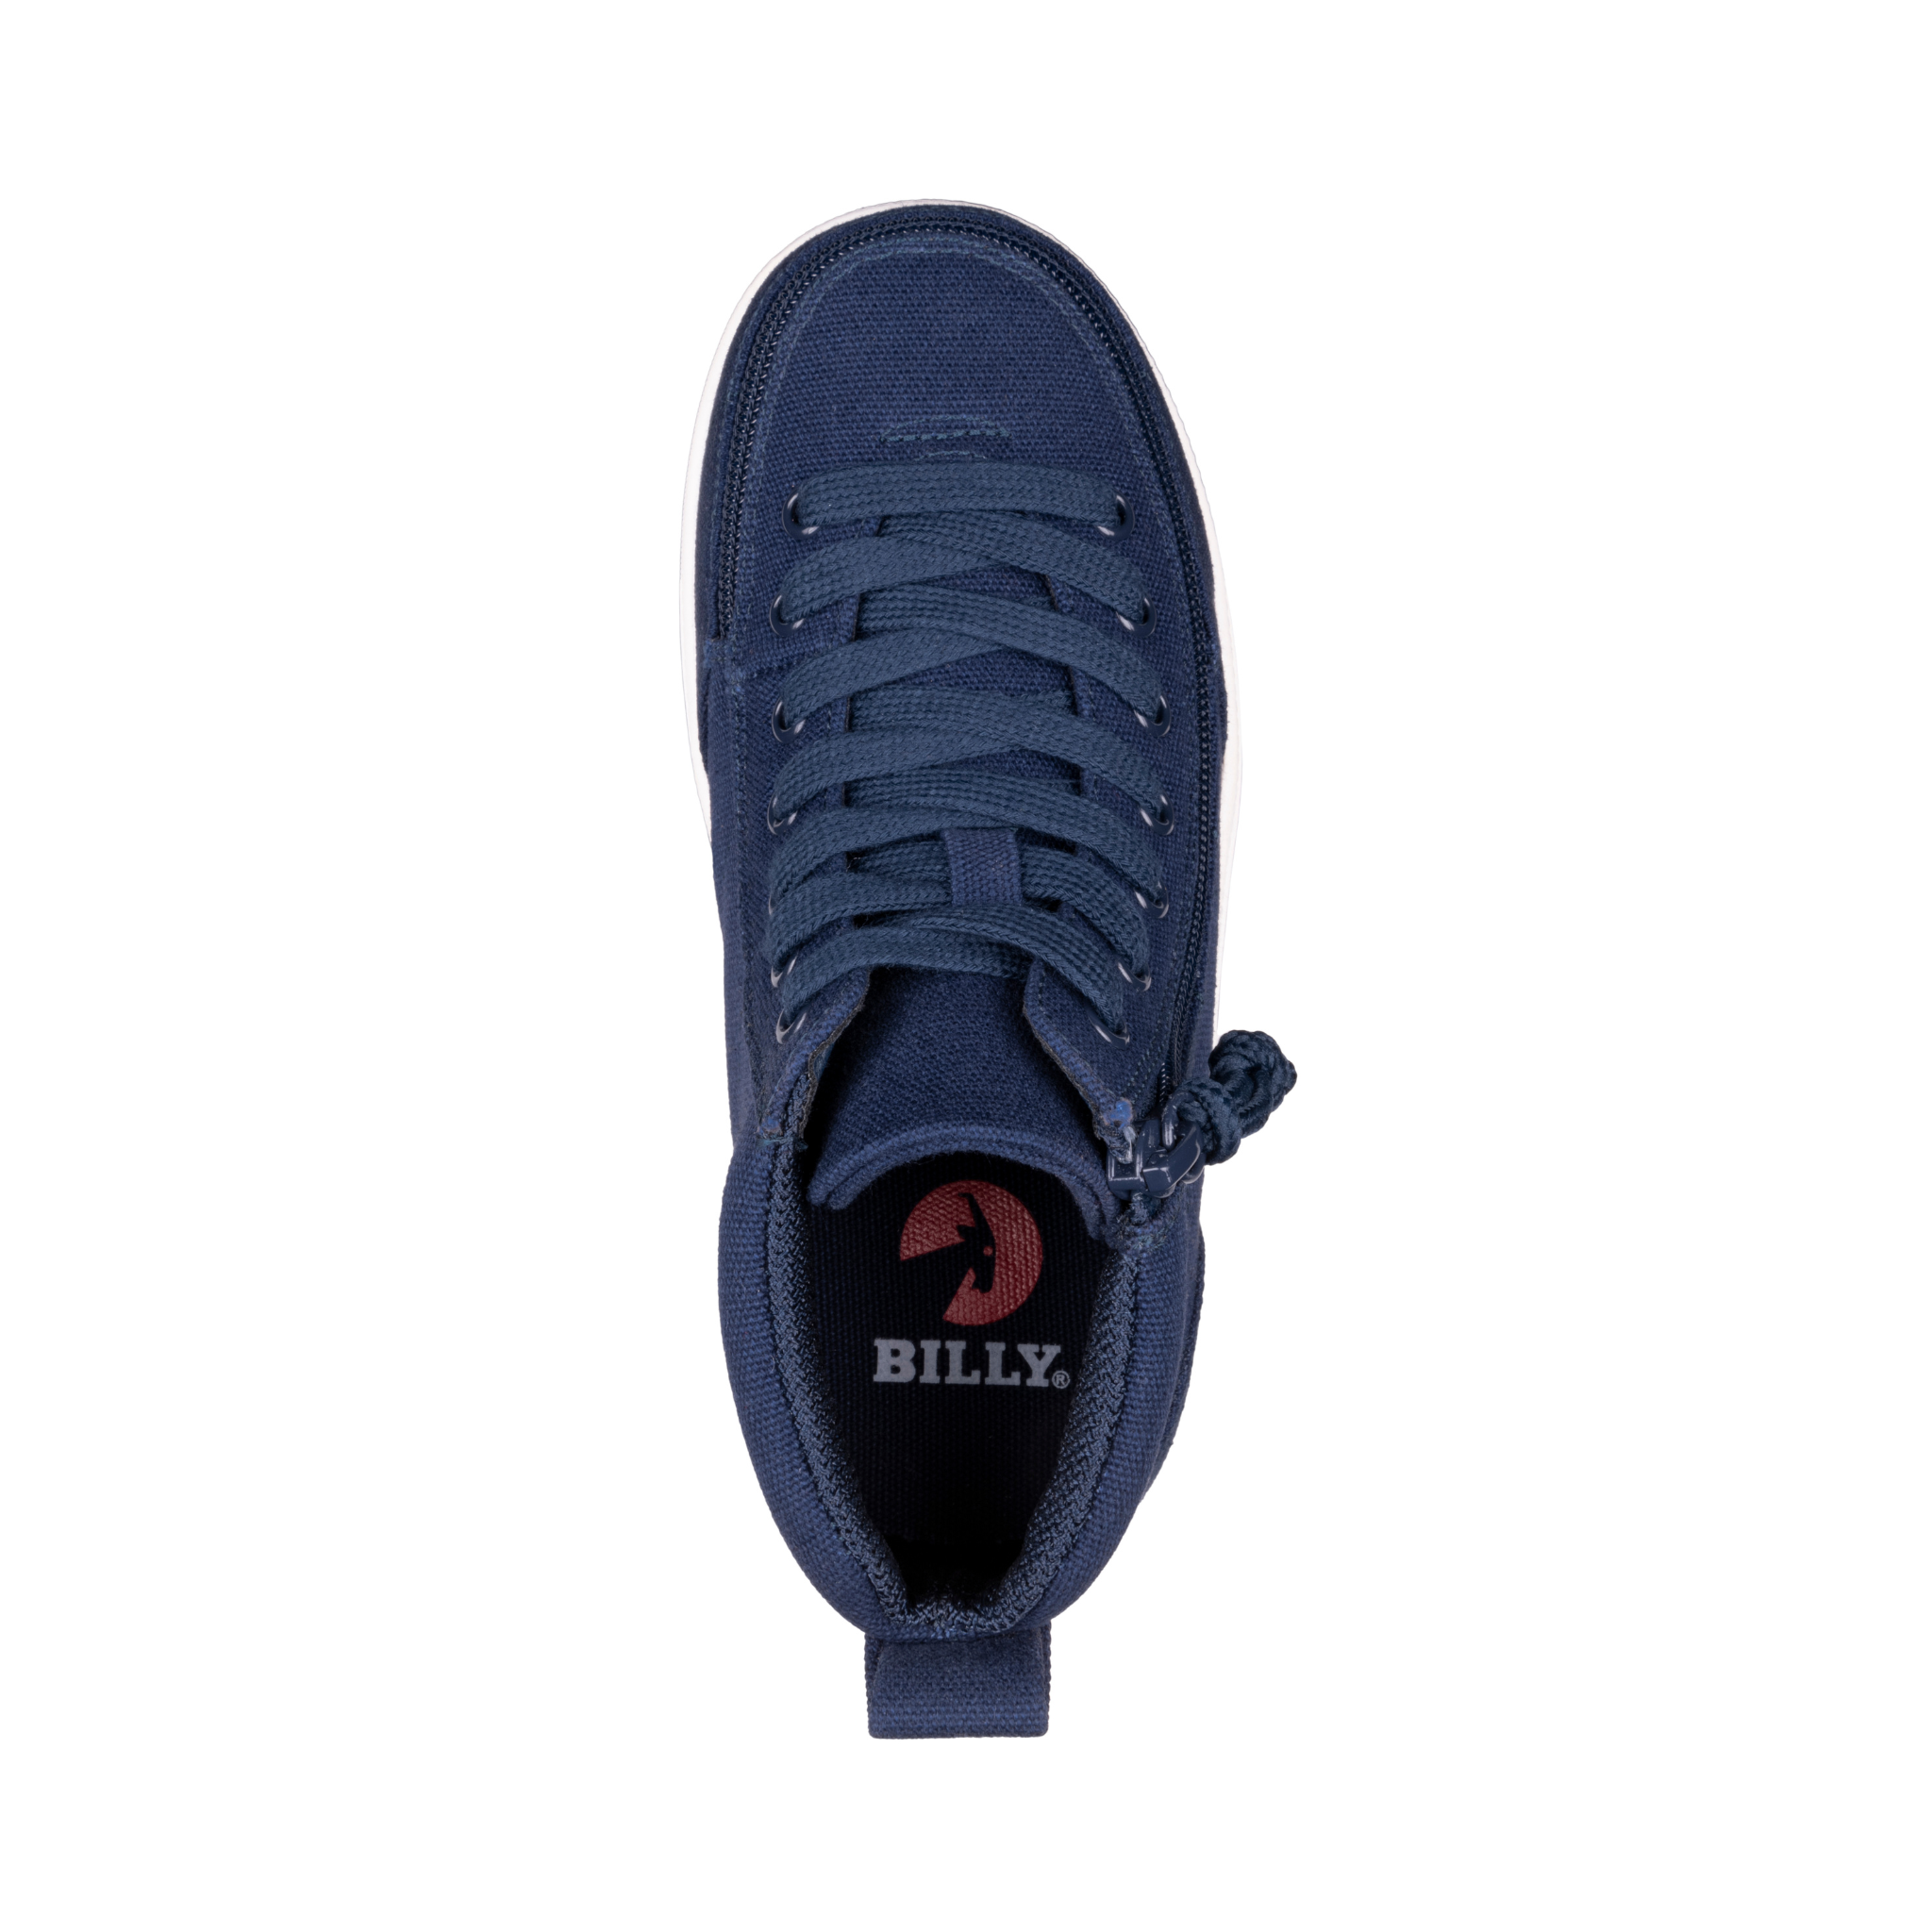 Billy Footwear (Kids) D|R II Fit - High Top Navy Canvas Shoes